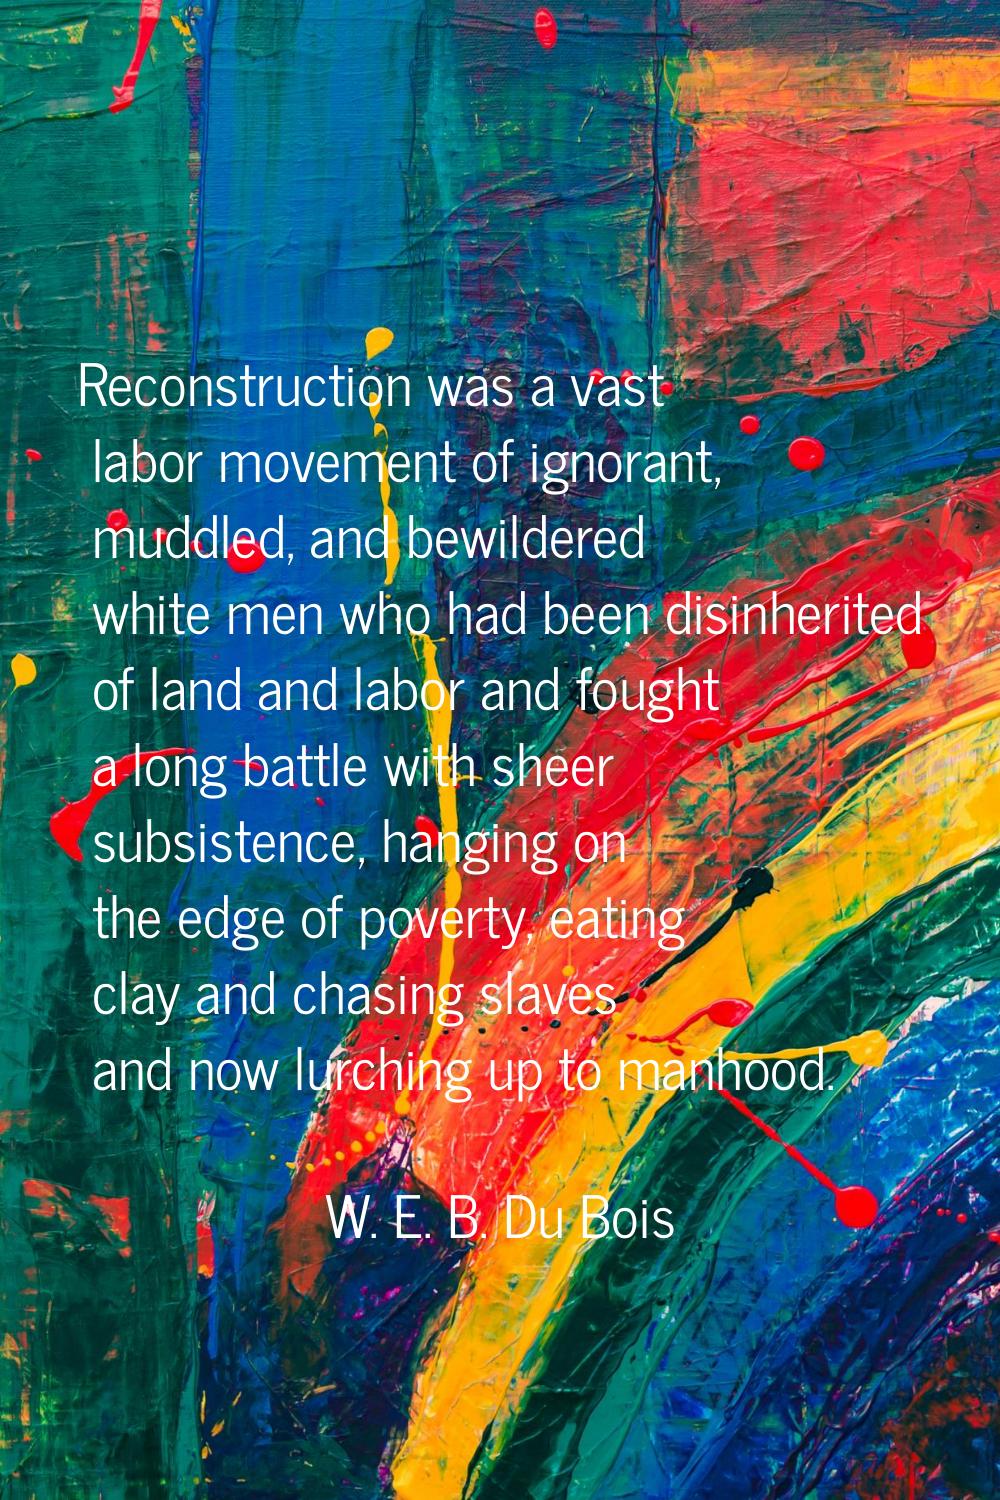 Reconstruction was a vast labor movement of ignorant, muddled, and bewildered white men who had bee